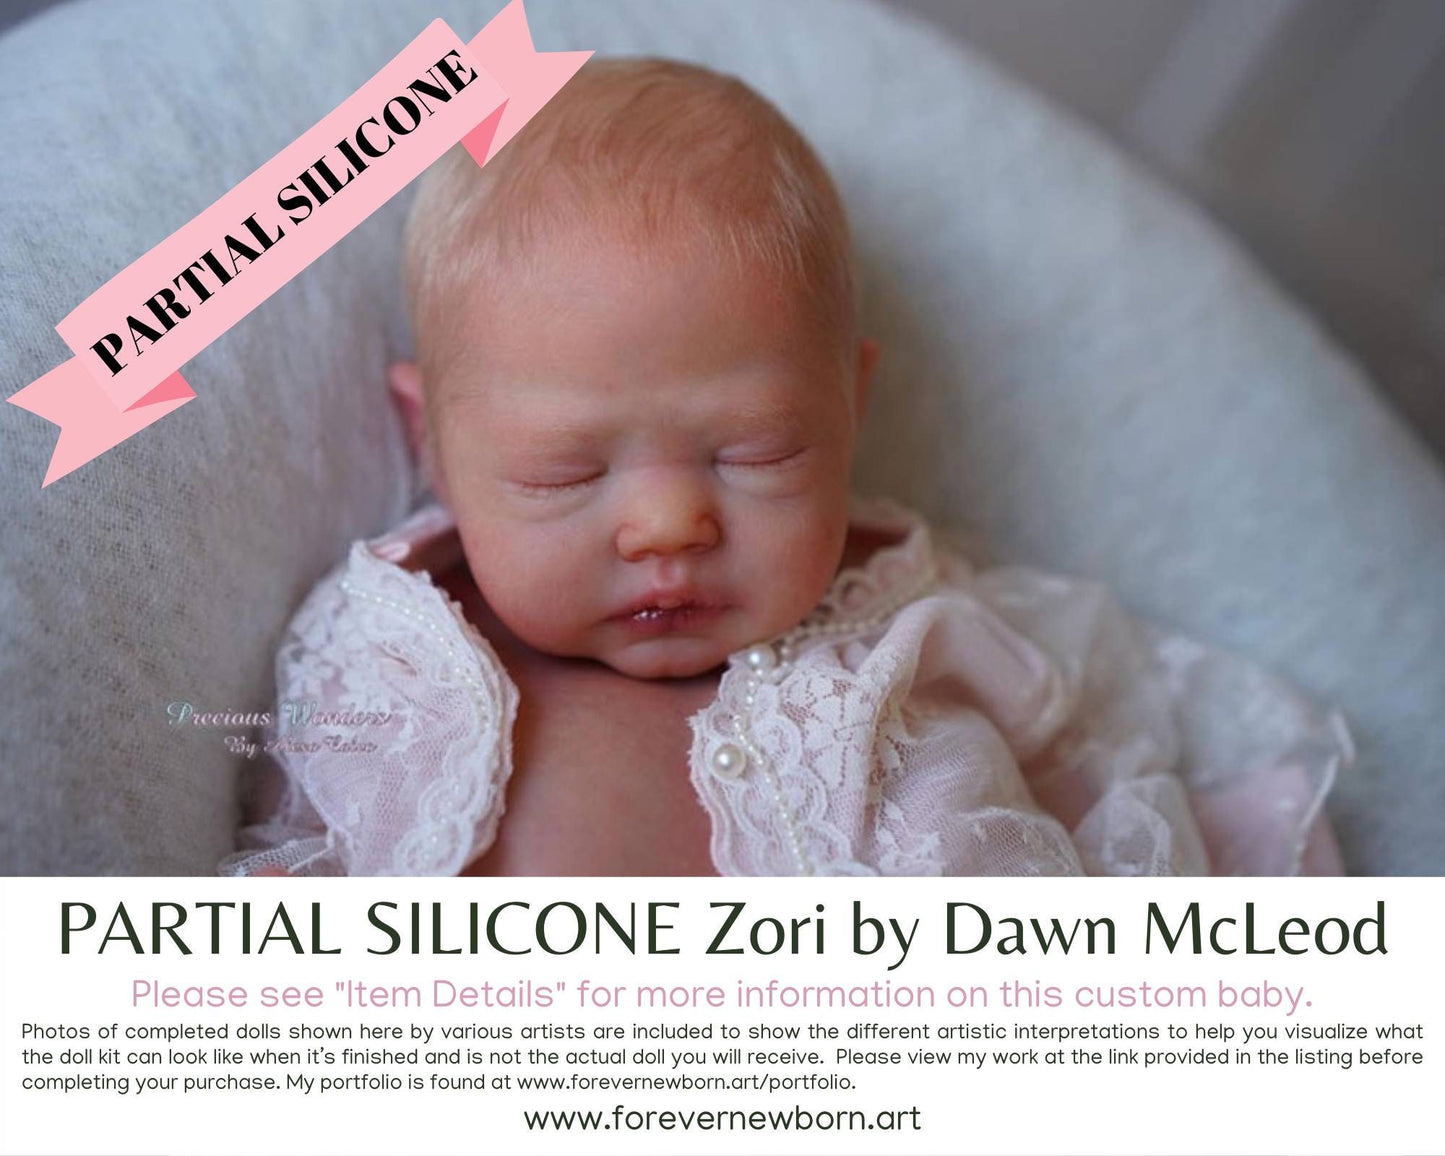 SiLiCoNe BaBy Zori by Dawn McLeod (16"+Full Limbs) with cloth body. Extended Processing Time May Be Required. ASK FIRST!